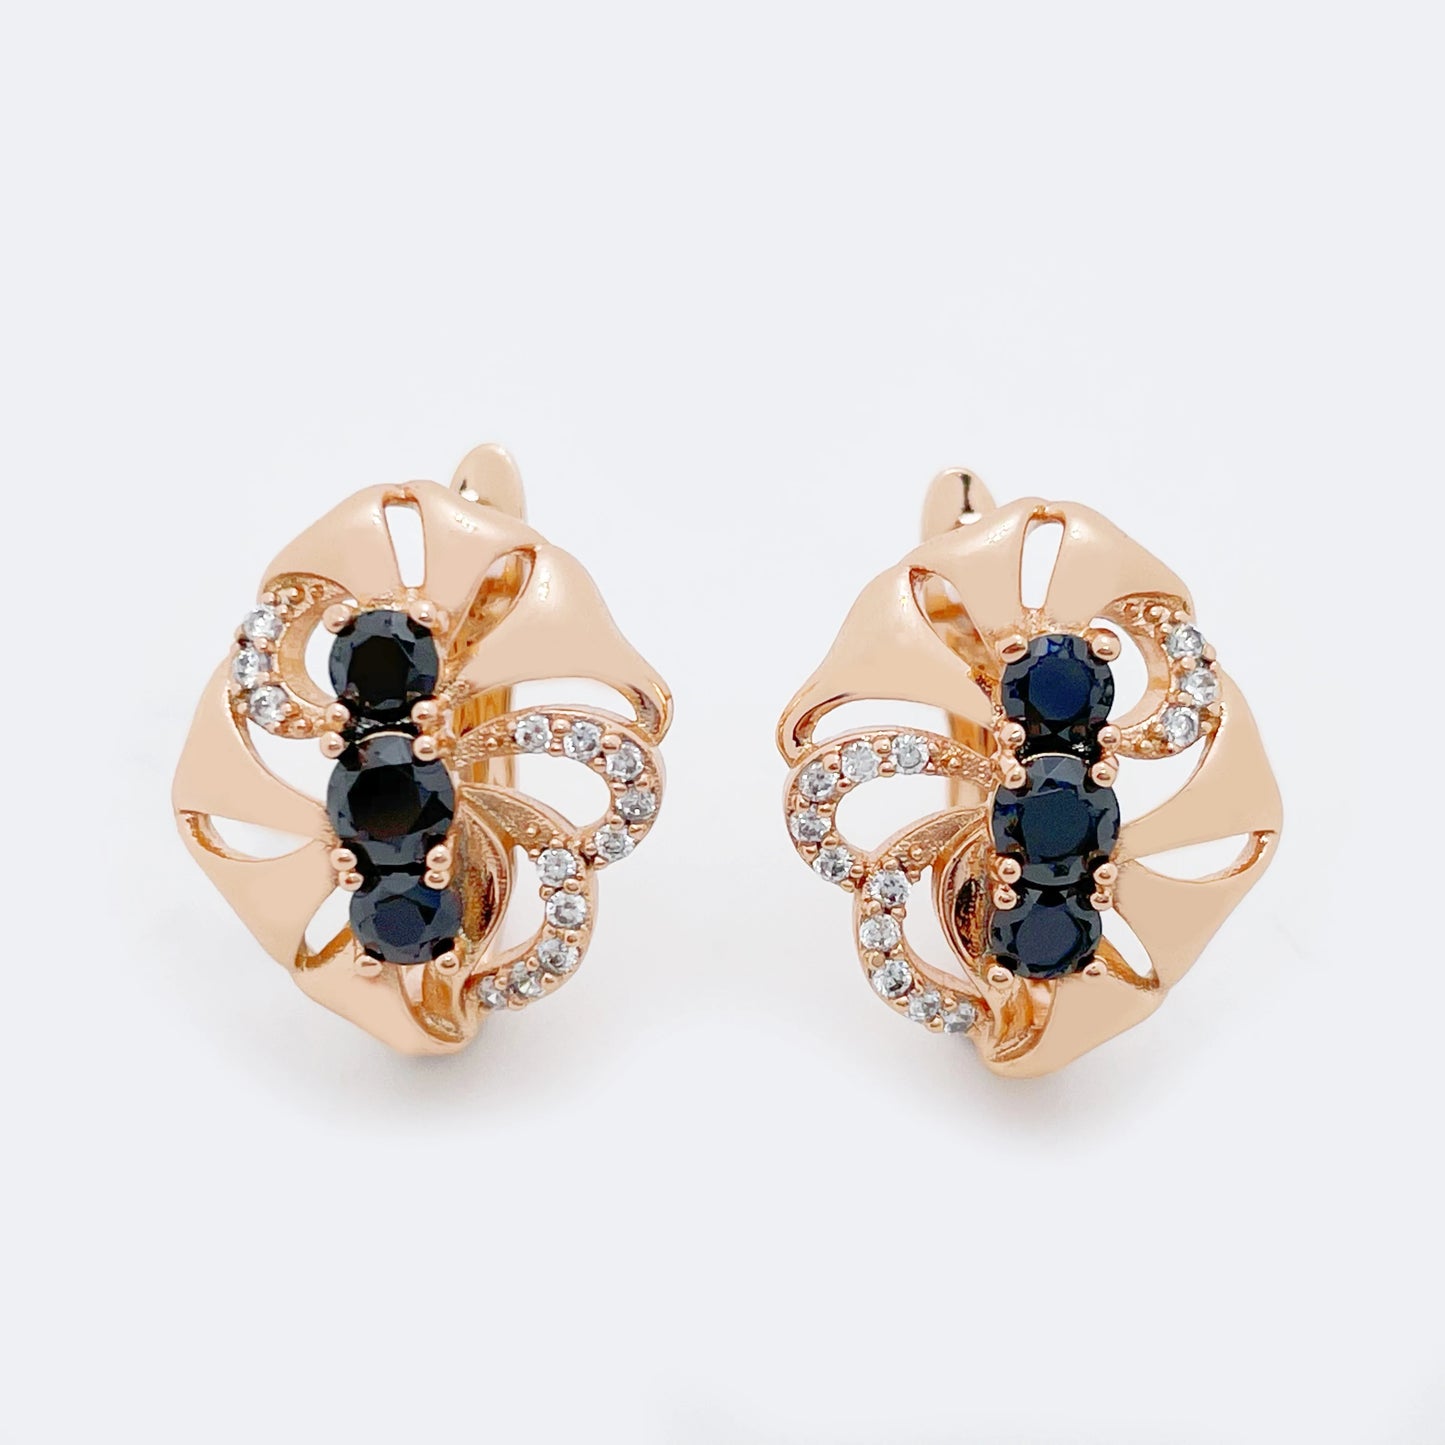 New Daily Women Romantic Fine Fashion Jewelry 585 Rose Gold Royal Blue/Black Natural Zircon Hollow Exclusive Drop Earrings